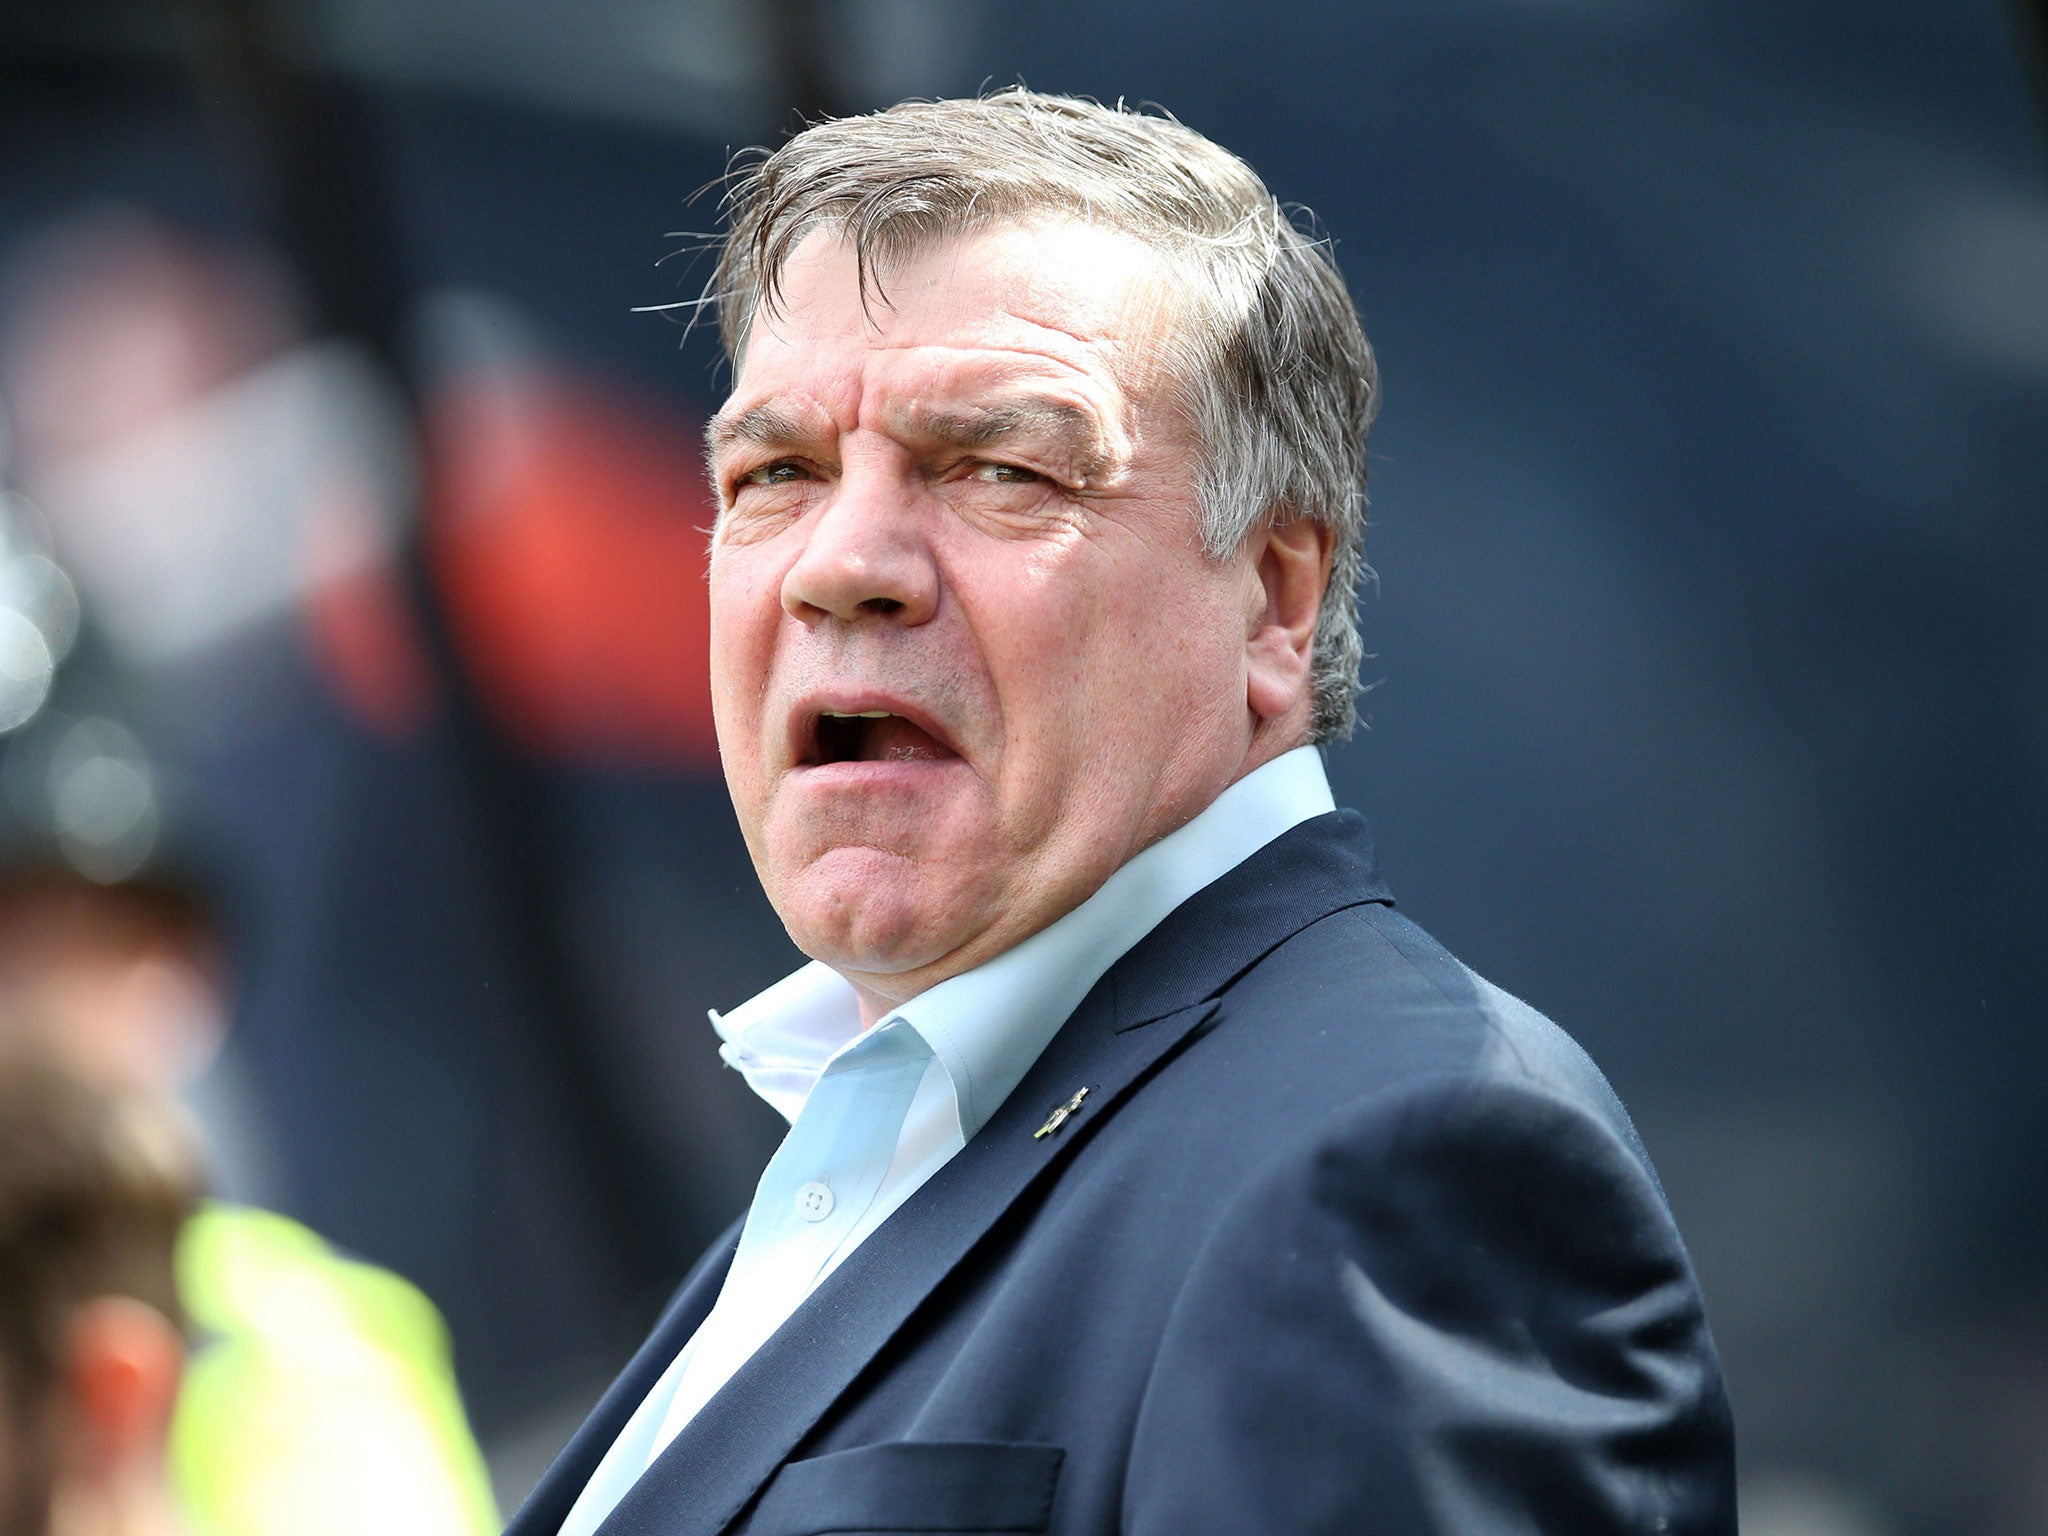 Sam Allardyce is the new Sunderland manager after signing a two-year deal